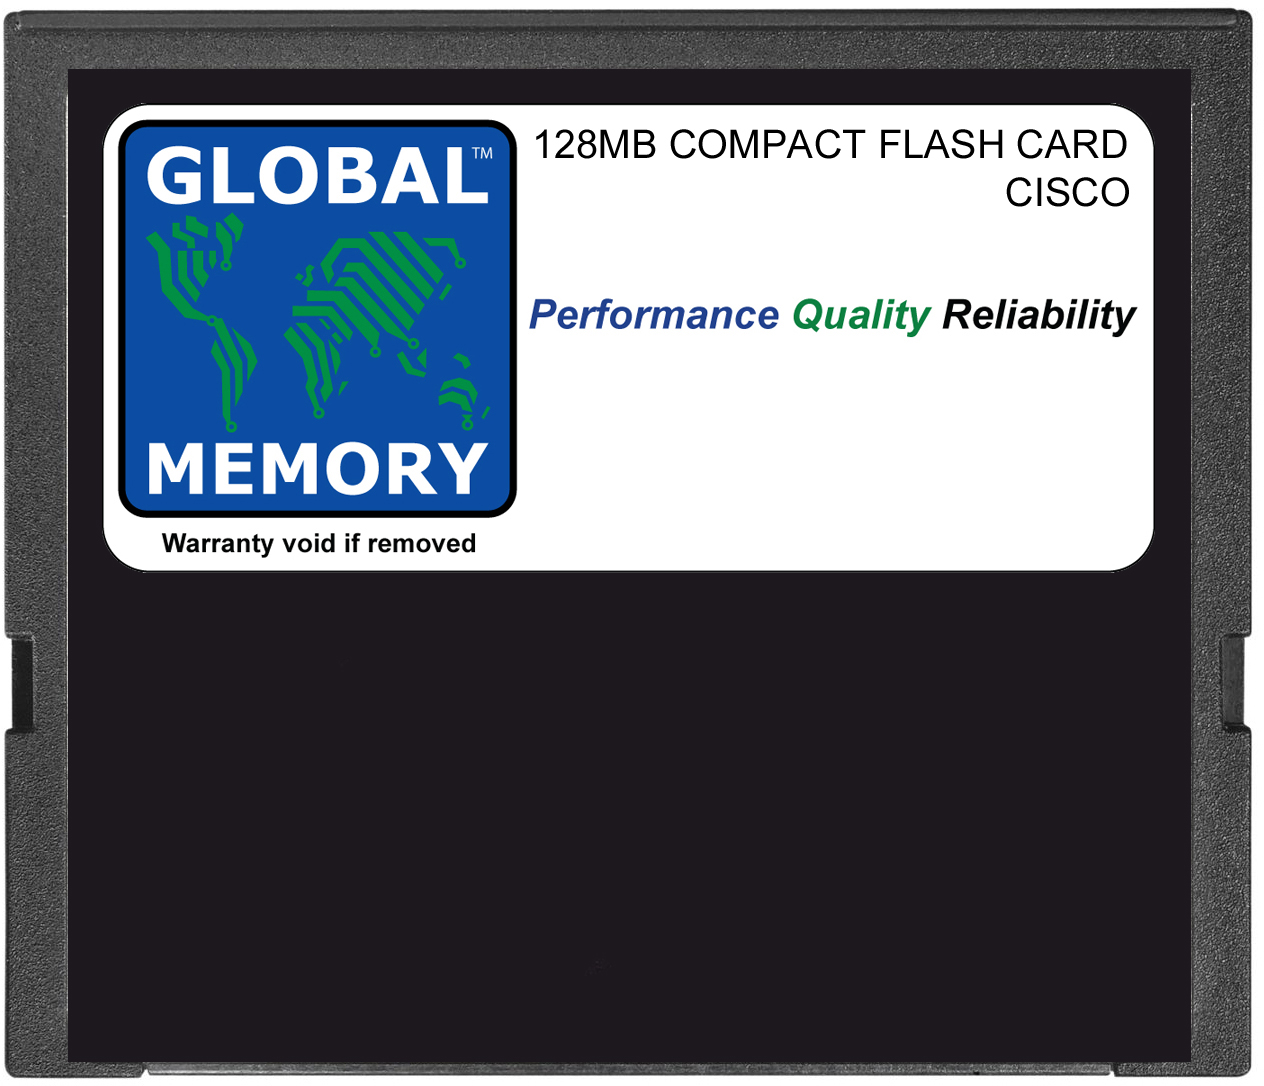 128MB COMPACT FLASH CARD MEMORY FOR CISCO 3725 ROUTER (MEM3725-128CF)